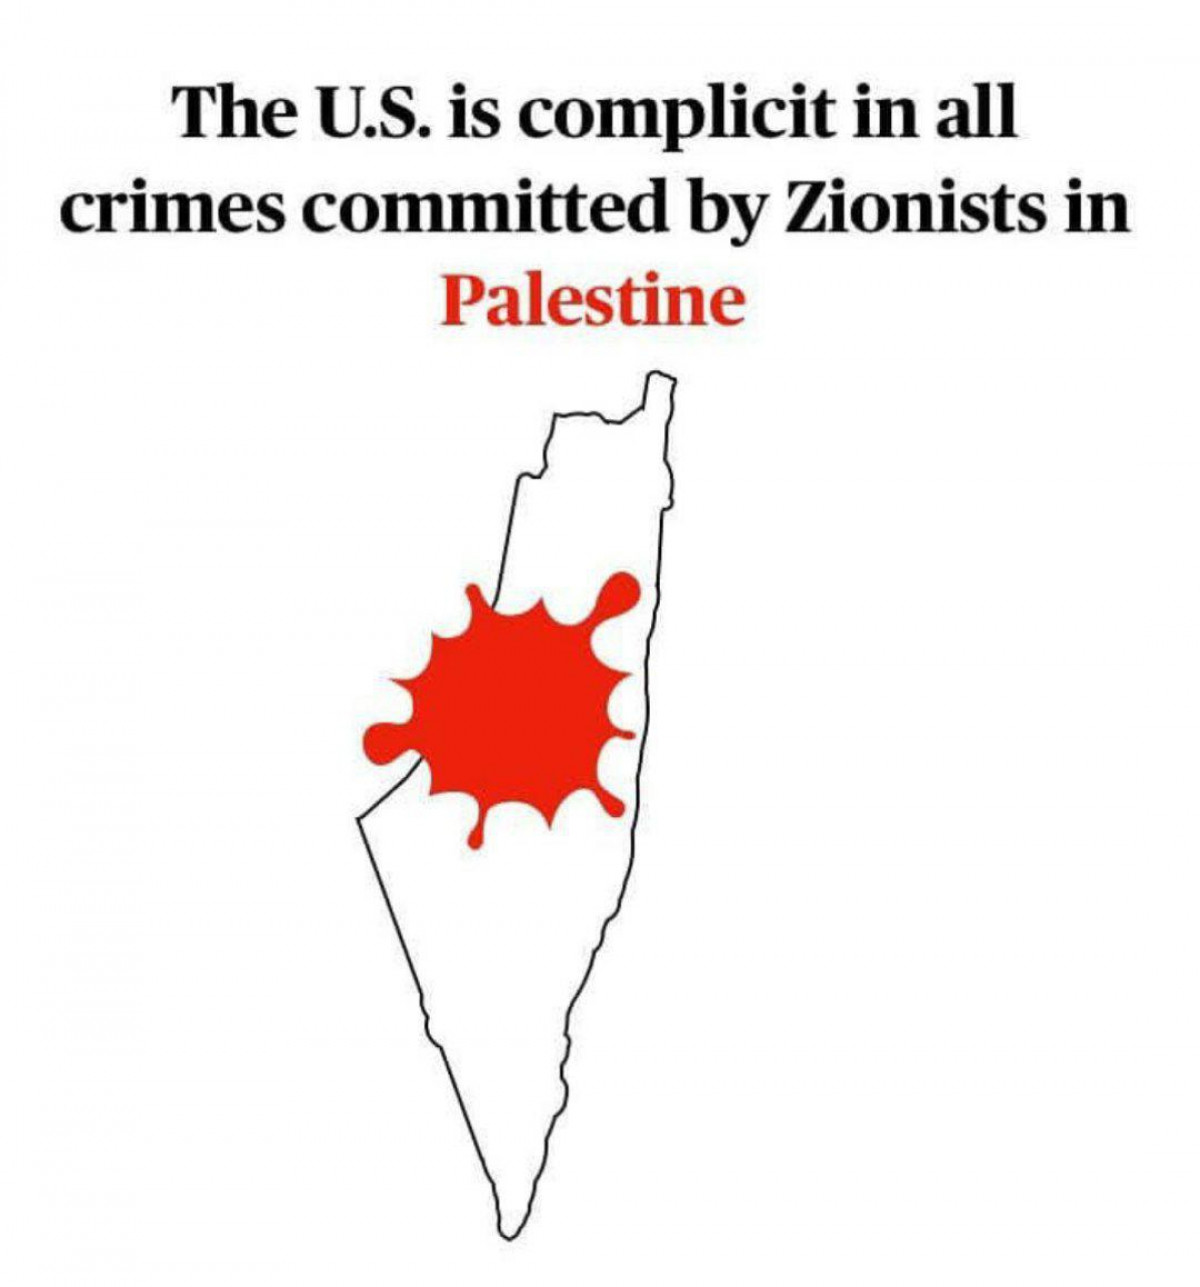 Collection of posters: The U.S. is complicit in all crimes committed by Zionists in Palestine